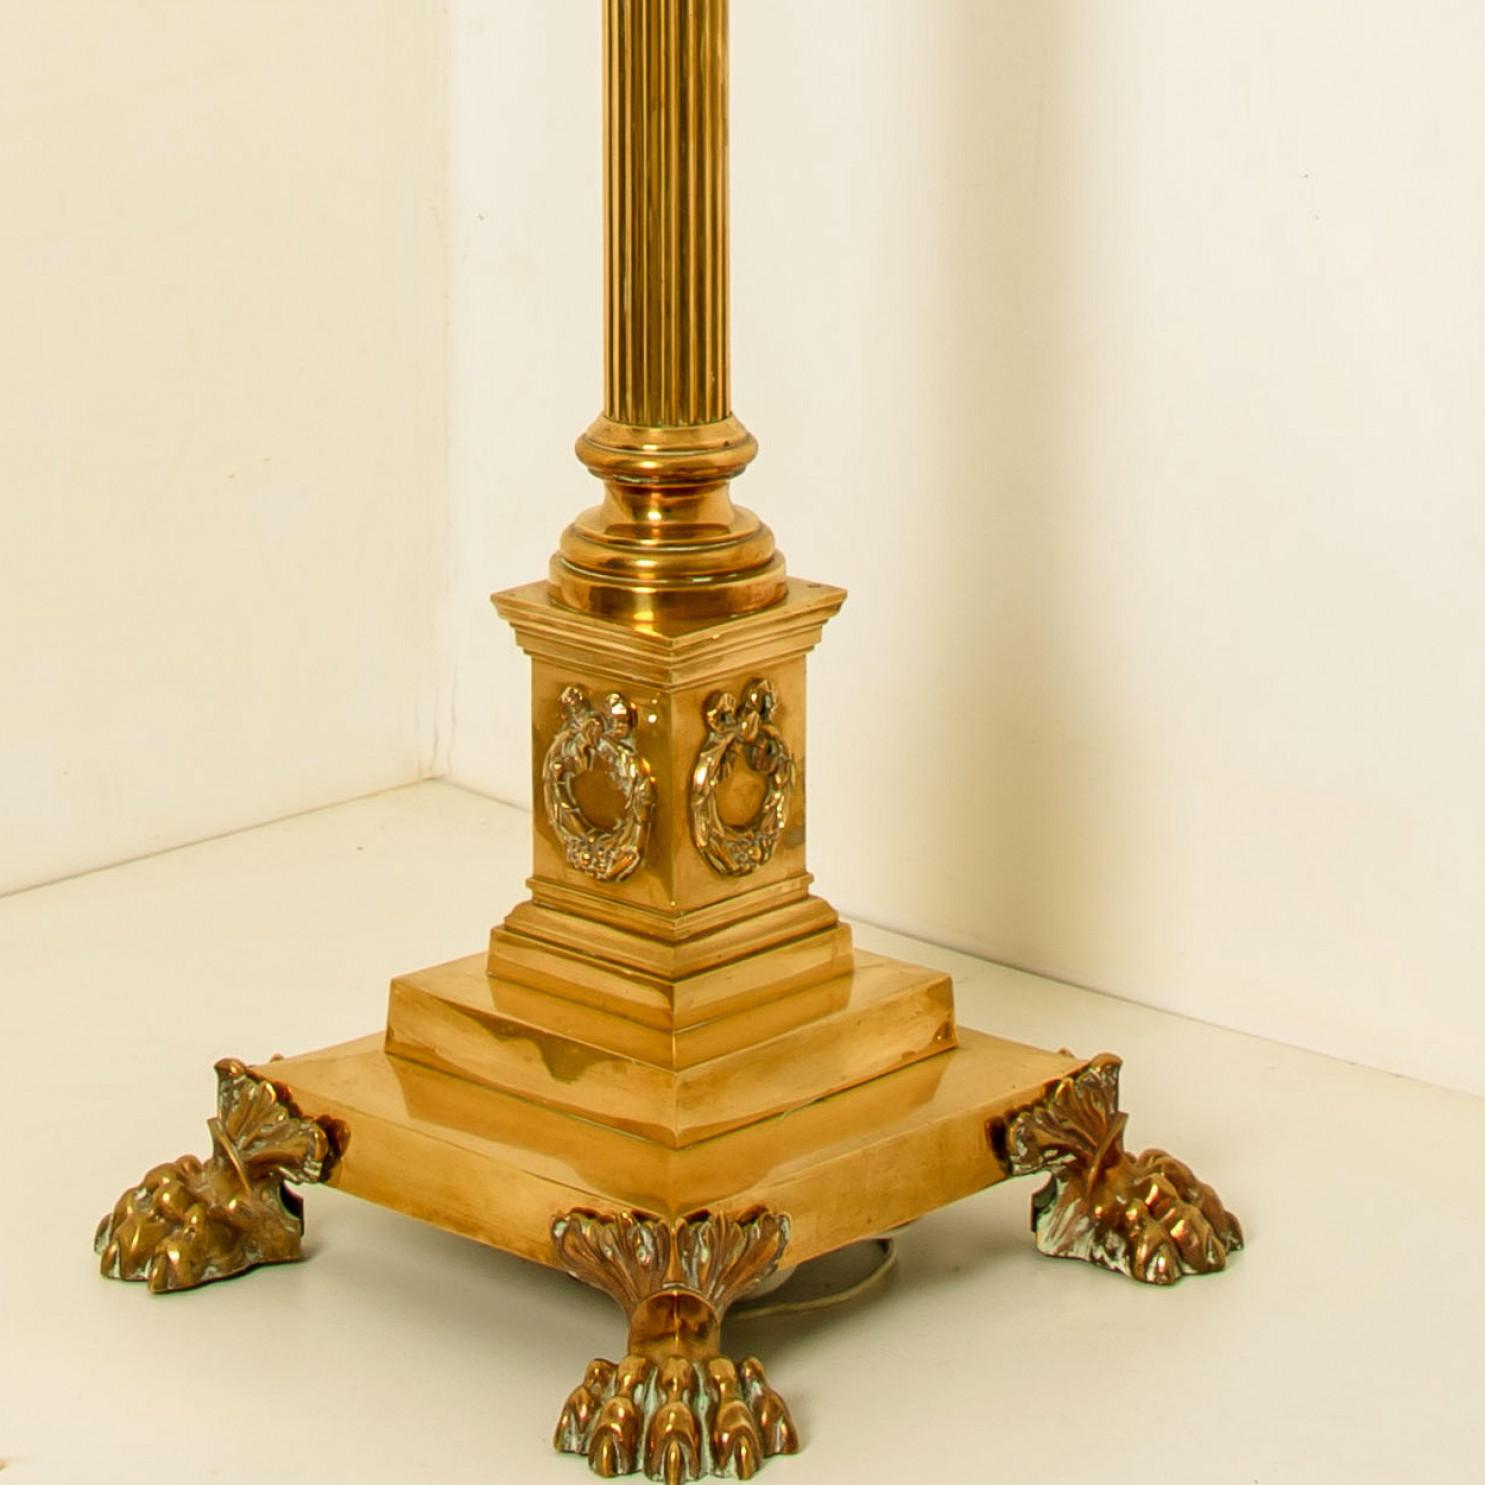 Antique Corinthian Column Brass Floor Lamp with Fringed Lampshade, England, 1890 For Sale 7